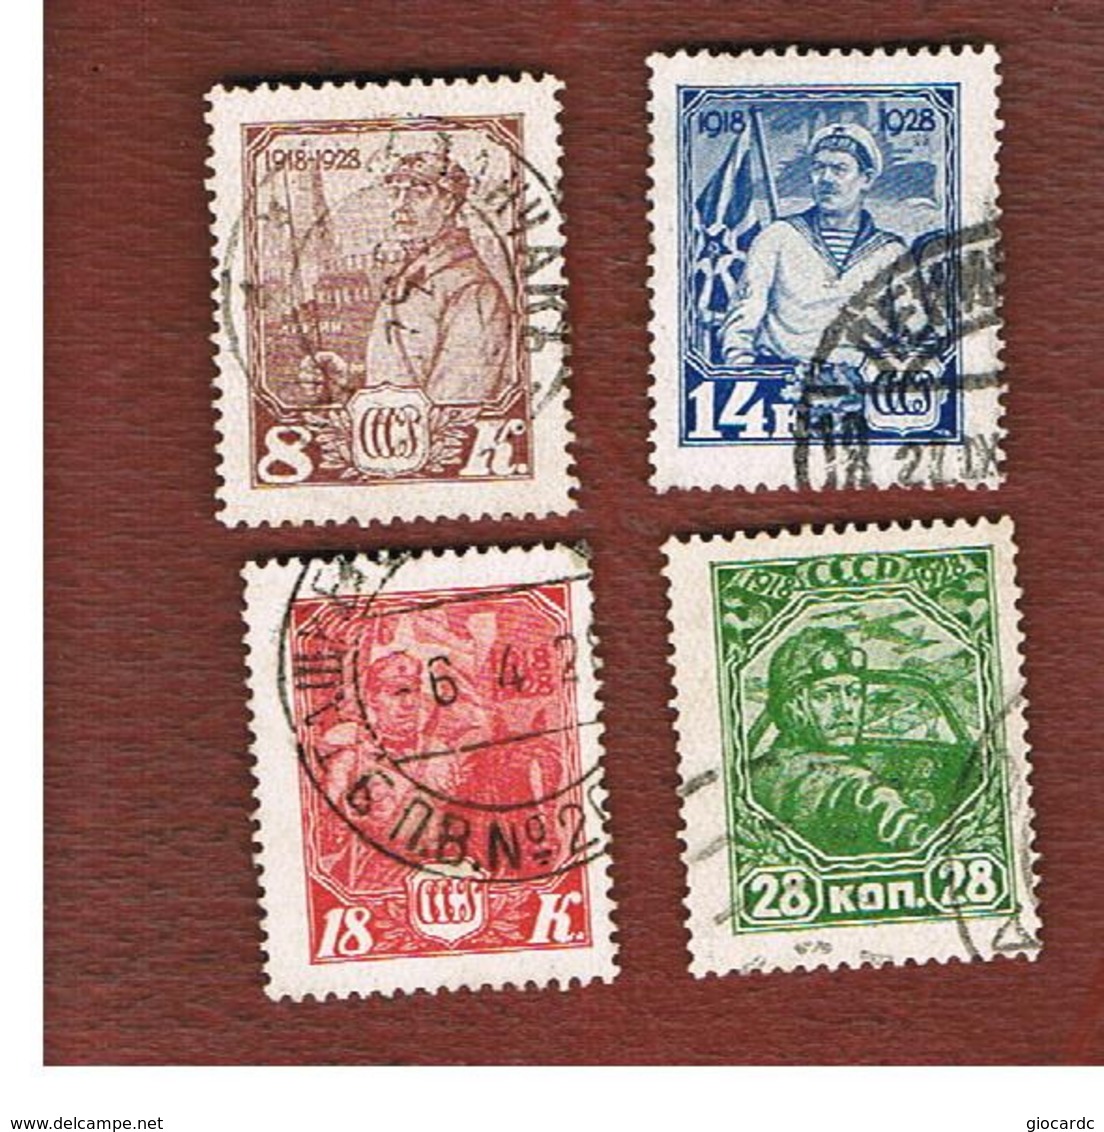 URSS -  SG 539.532   -  1928 RED ARMY ANNIVERSARY (COMPLET SET OF 4)  - USED °   RIF. CP - Usati